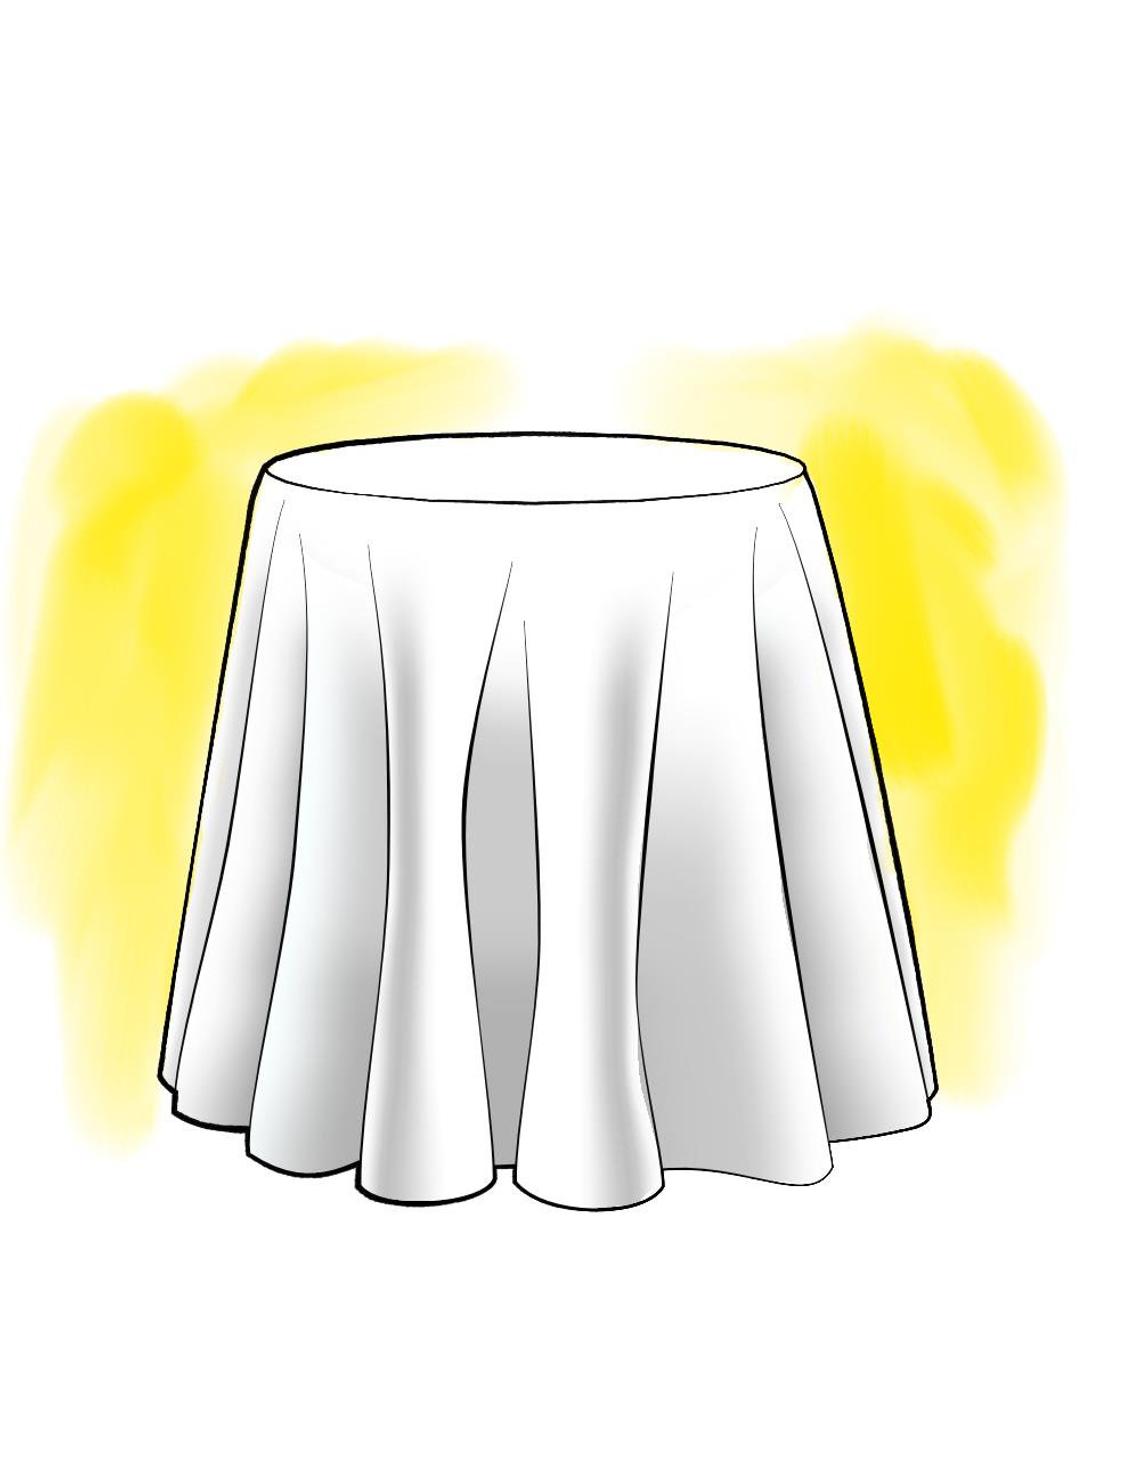 round tablecloth in classic storm gray ticking stripe on white